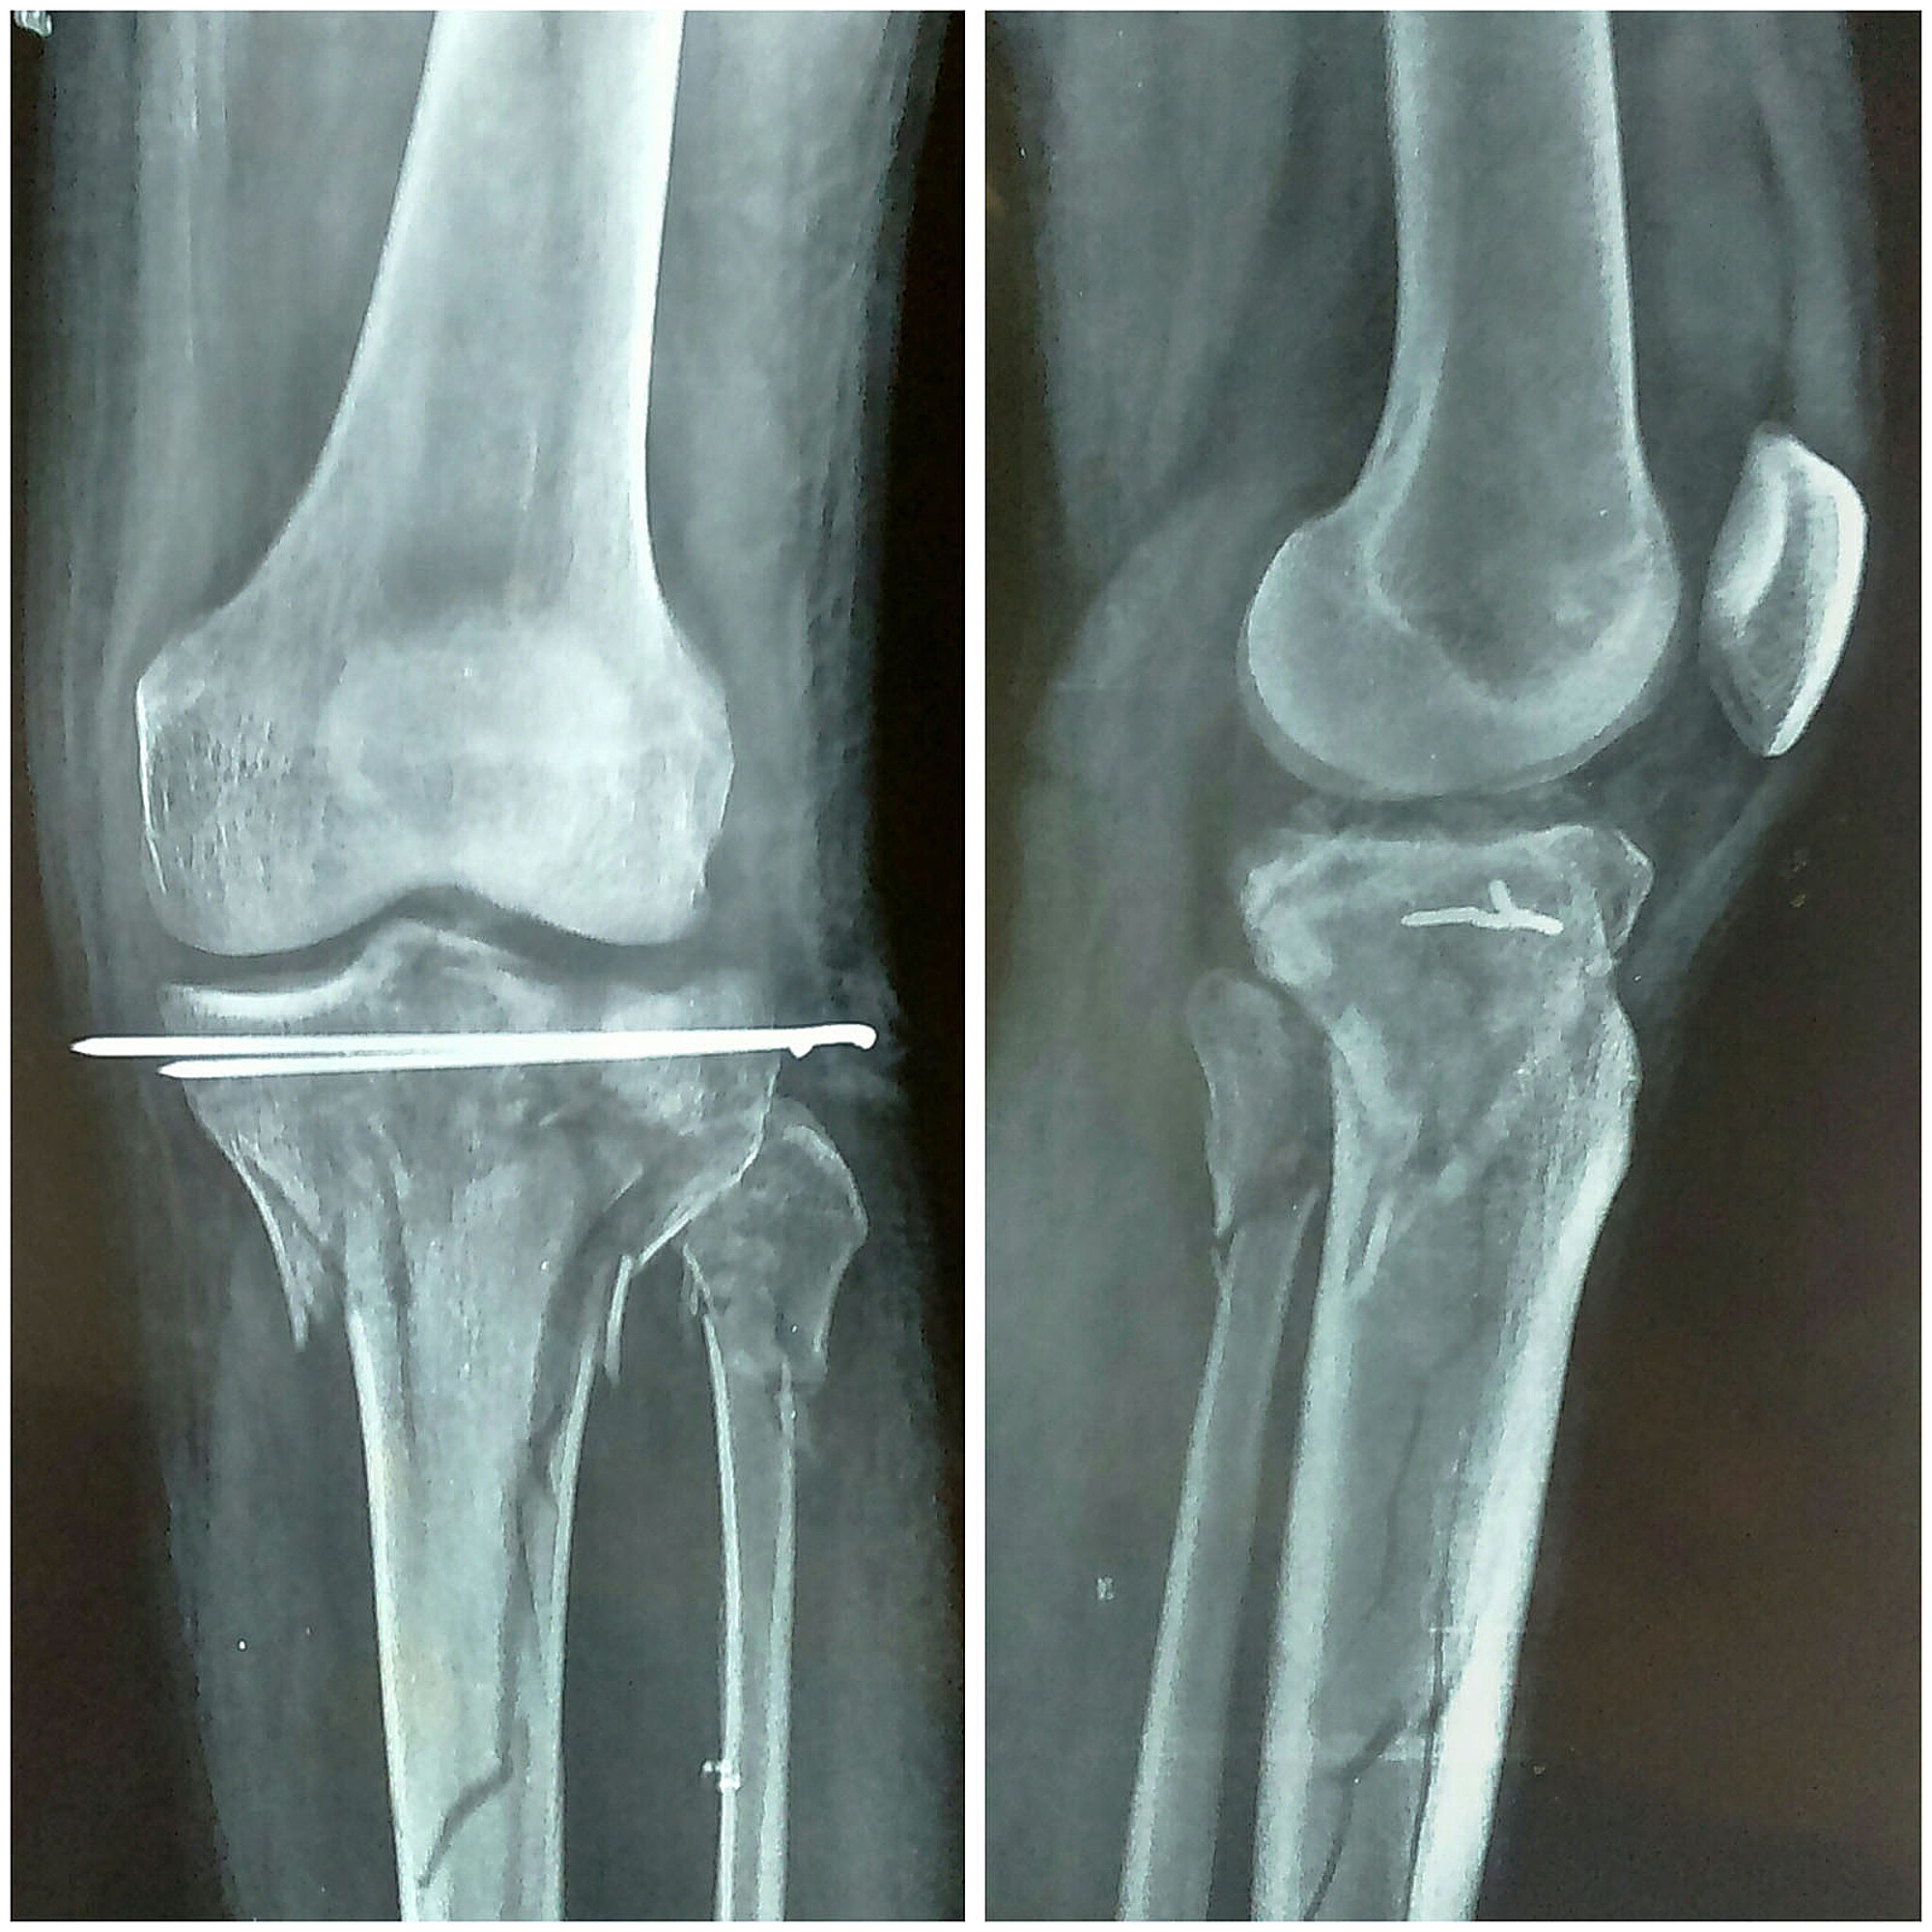 tibial plateau fracture swelling